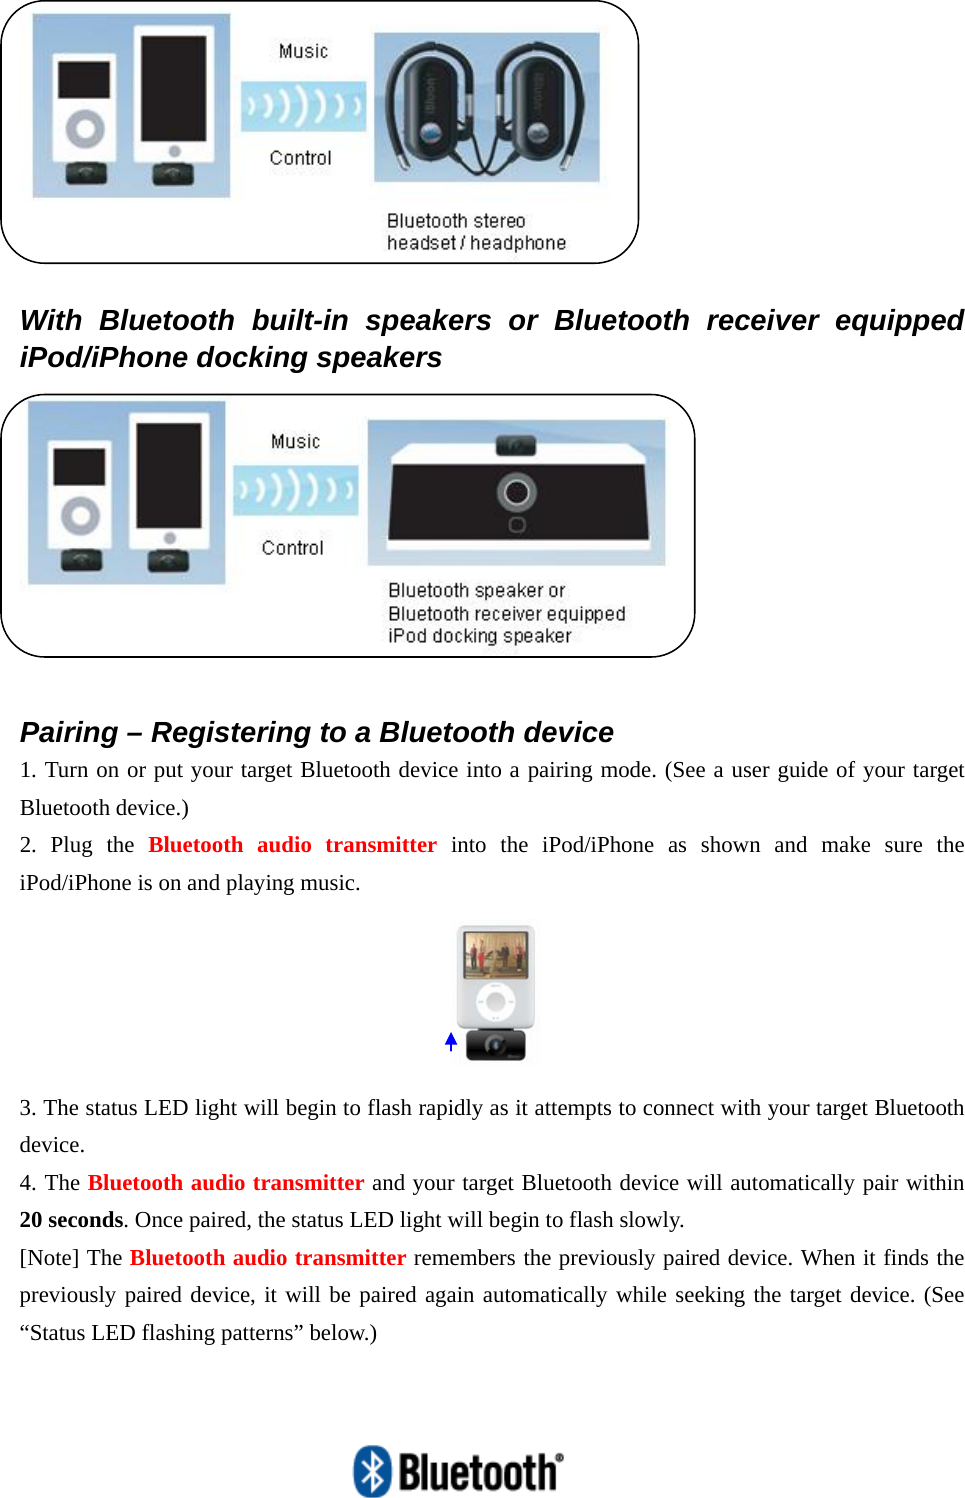     With Bluetooth built-in speakers or Bluetooth receiver equipped iPod/iPhone docking speakers   Pairing – Registering to a Bluetooth device 1. Turn on or put your target Bluetooth device into a pairing mode. (See a user guide of your target Bluetooth device.) 2. Plug the Bluetooth audio transmitter into the iPod/iPhone as shown and make sure the iPod/iPhone is on and playing music.      3. The status LED light will begin to flash rapidly as it attempts to connect with your target Bluetooth device. 4. The Bluetooth audio transmitter and your target Bluetooth device will automatically pair within 20 seconds. Once paired, the status LED light will begin to flash slowly. [Note] The Bluetooth audio transmitter remembers the previously paired device. When it finds the previously paired device, it will be paired again automatically while seeking the target device. (See “Status LED flashing patterns” below.) 